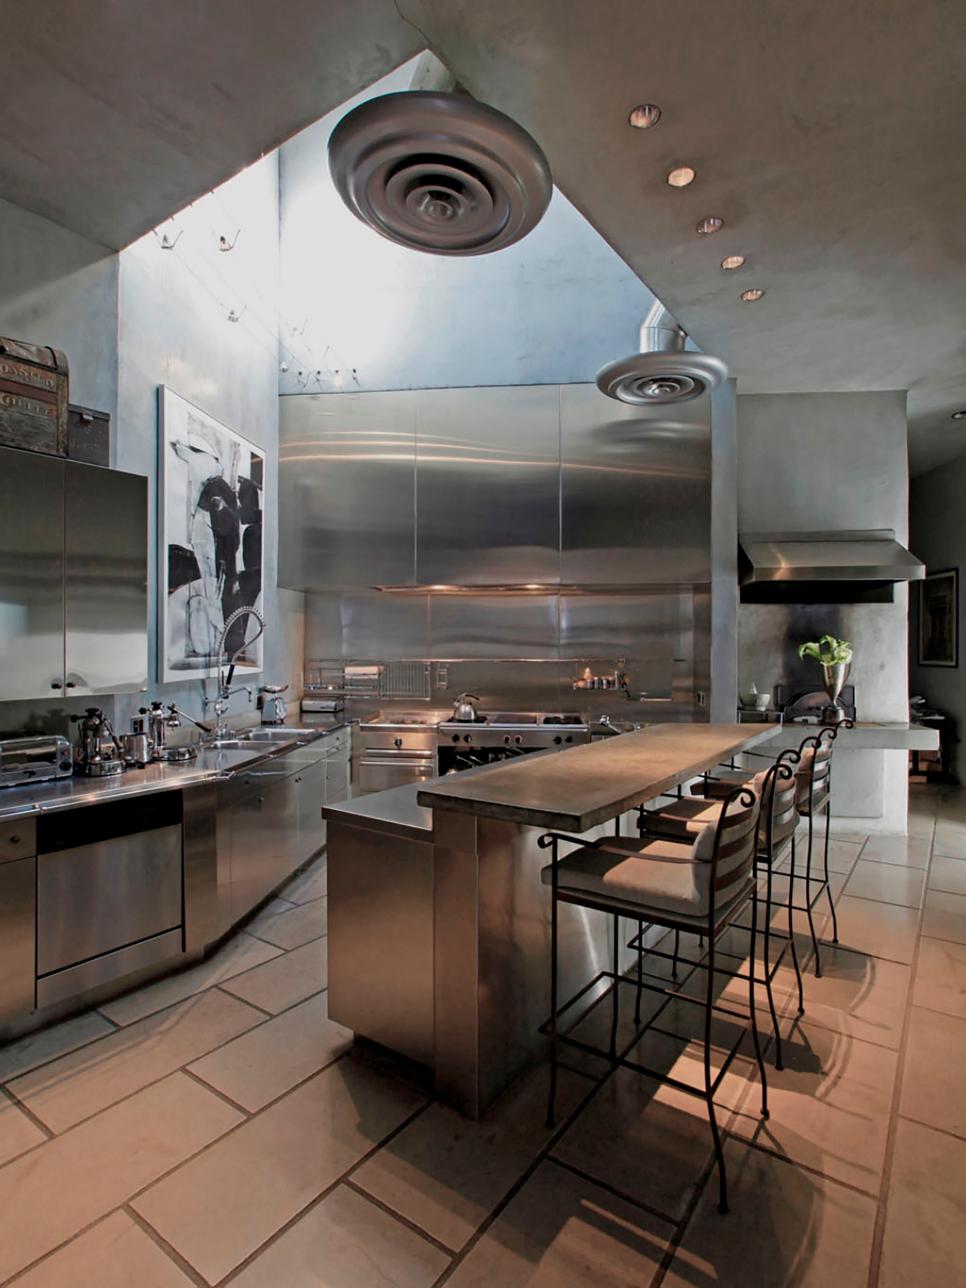 kitchen industrial chef stunning style andrea michaelson hgtv steel look